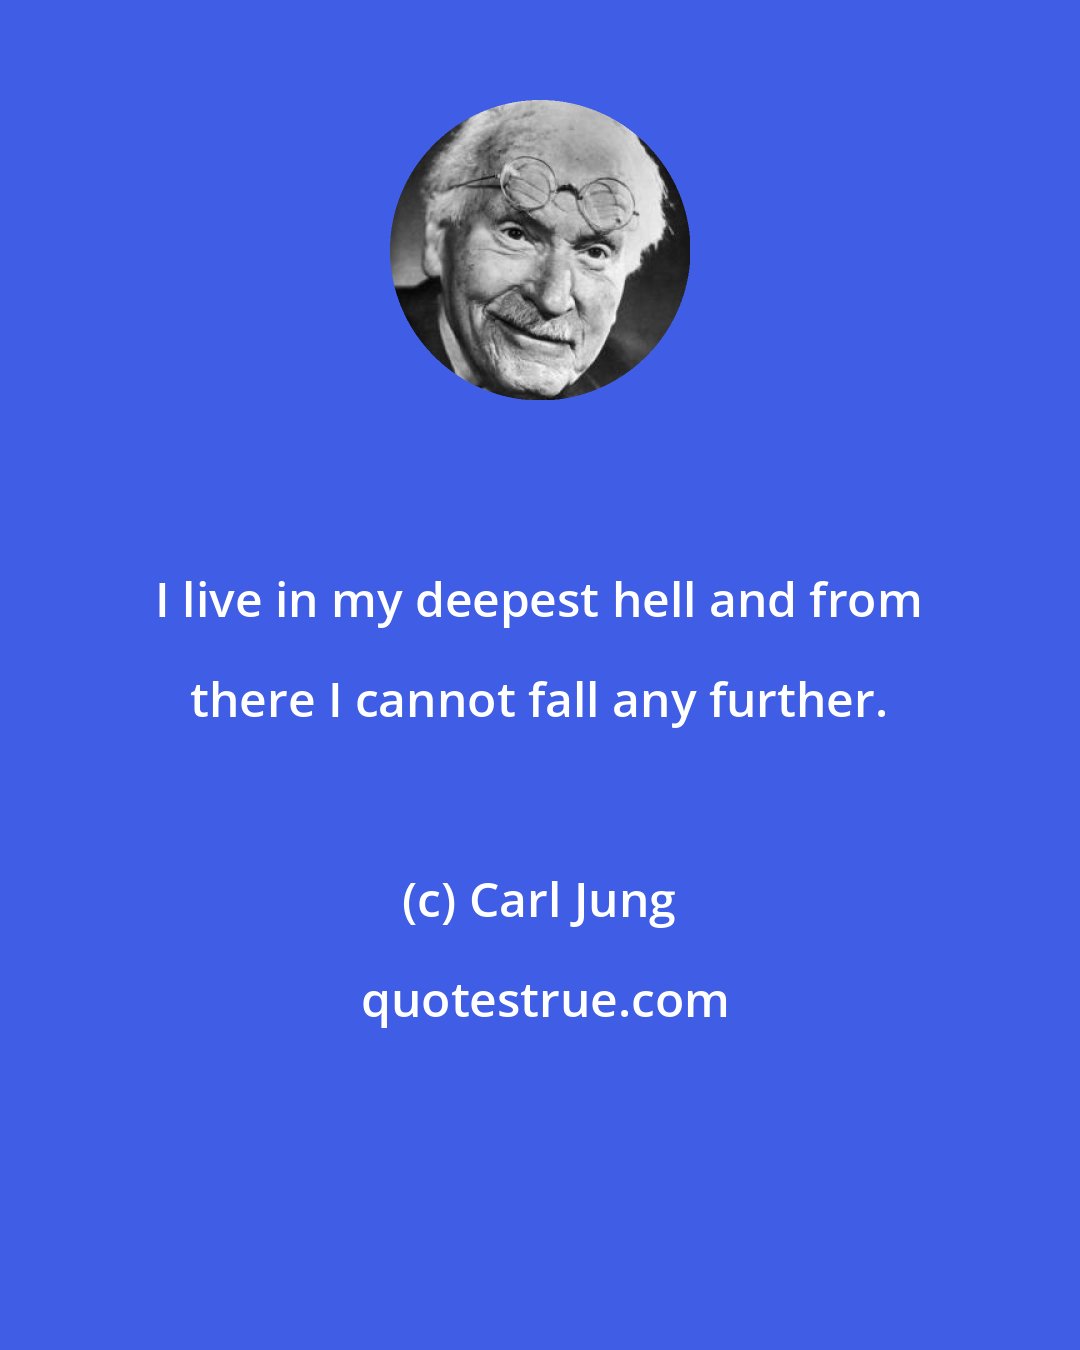 Carl Jung: I live in my deepest hell and from there I cannot fall any further.